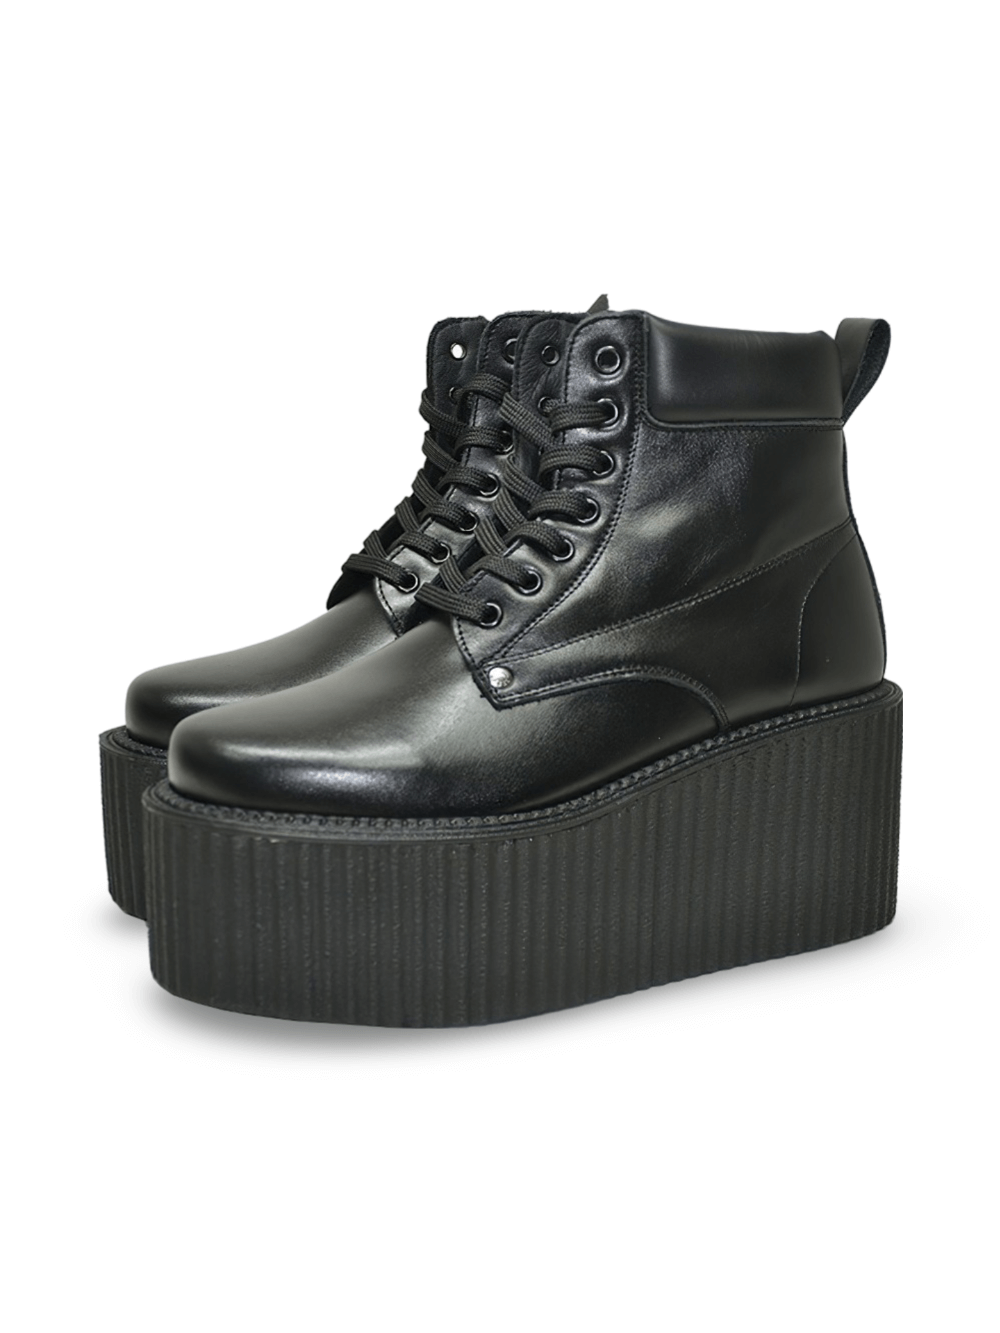 Black Creepers with Triple Rubber Sole 10cm Heel